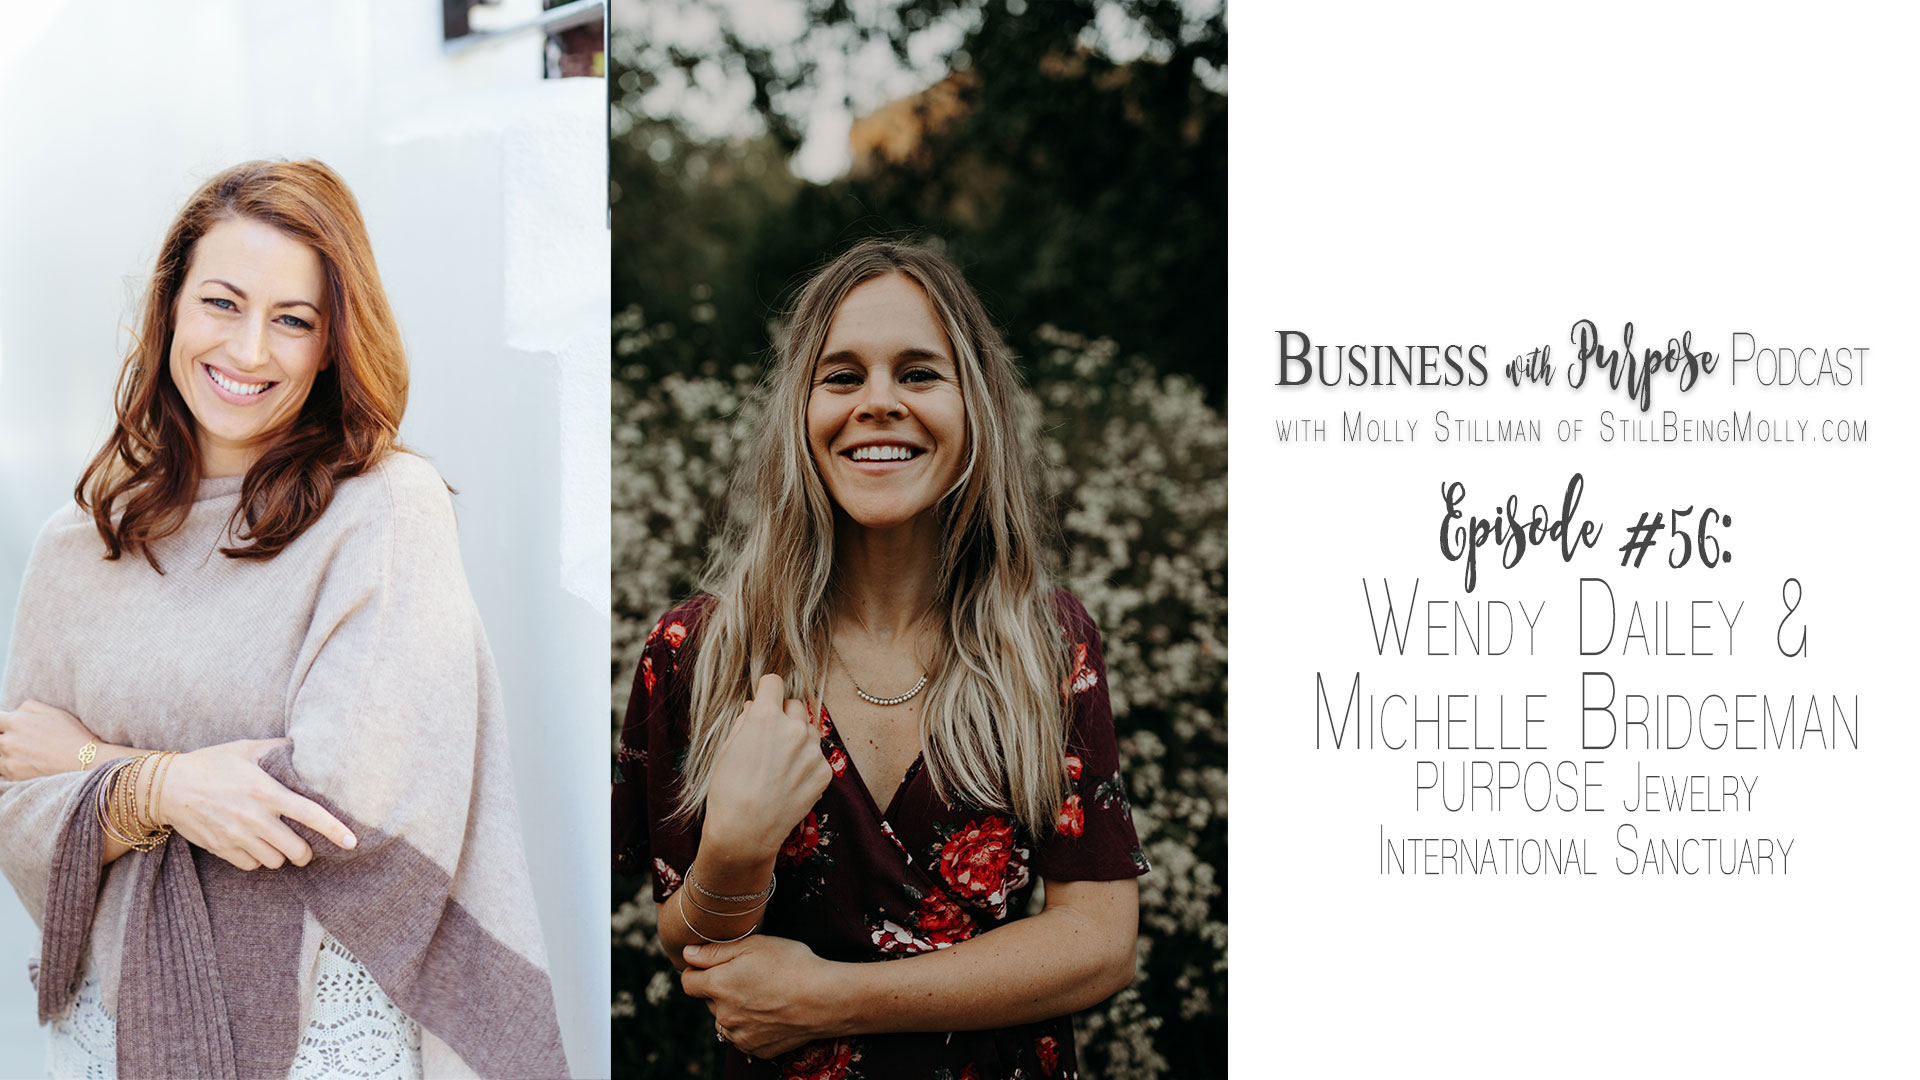 EP 56: Wendy Dailey & Michelle Bridgeman of International Sanctuary & PURPOSE Jewelry by business podcast Business with Purpose from North Carolina ethical blogger Still Being Molly